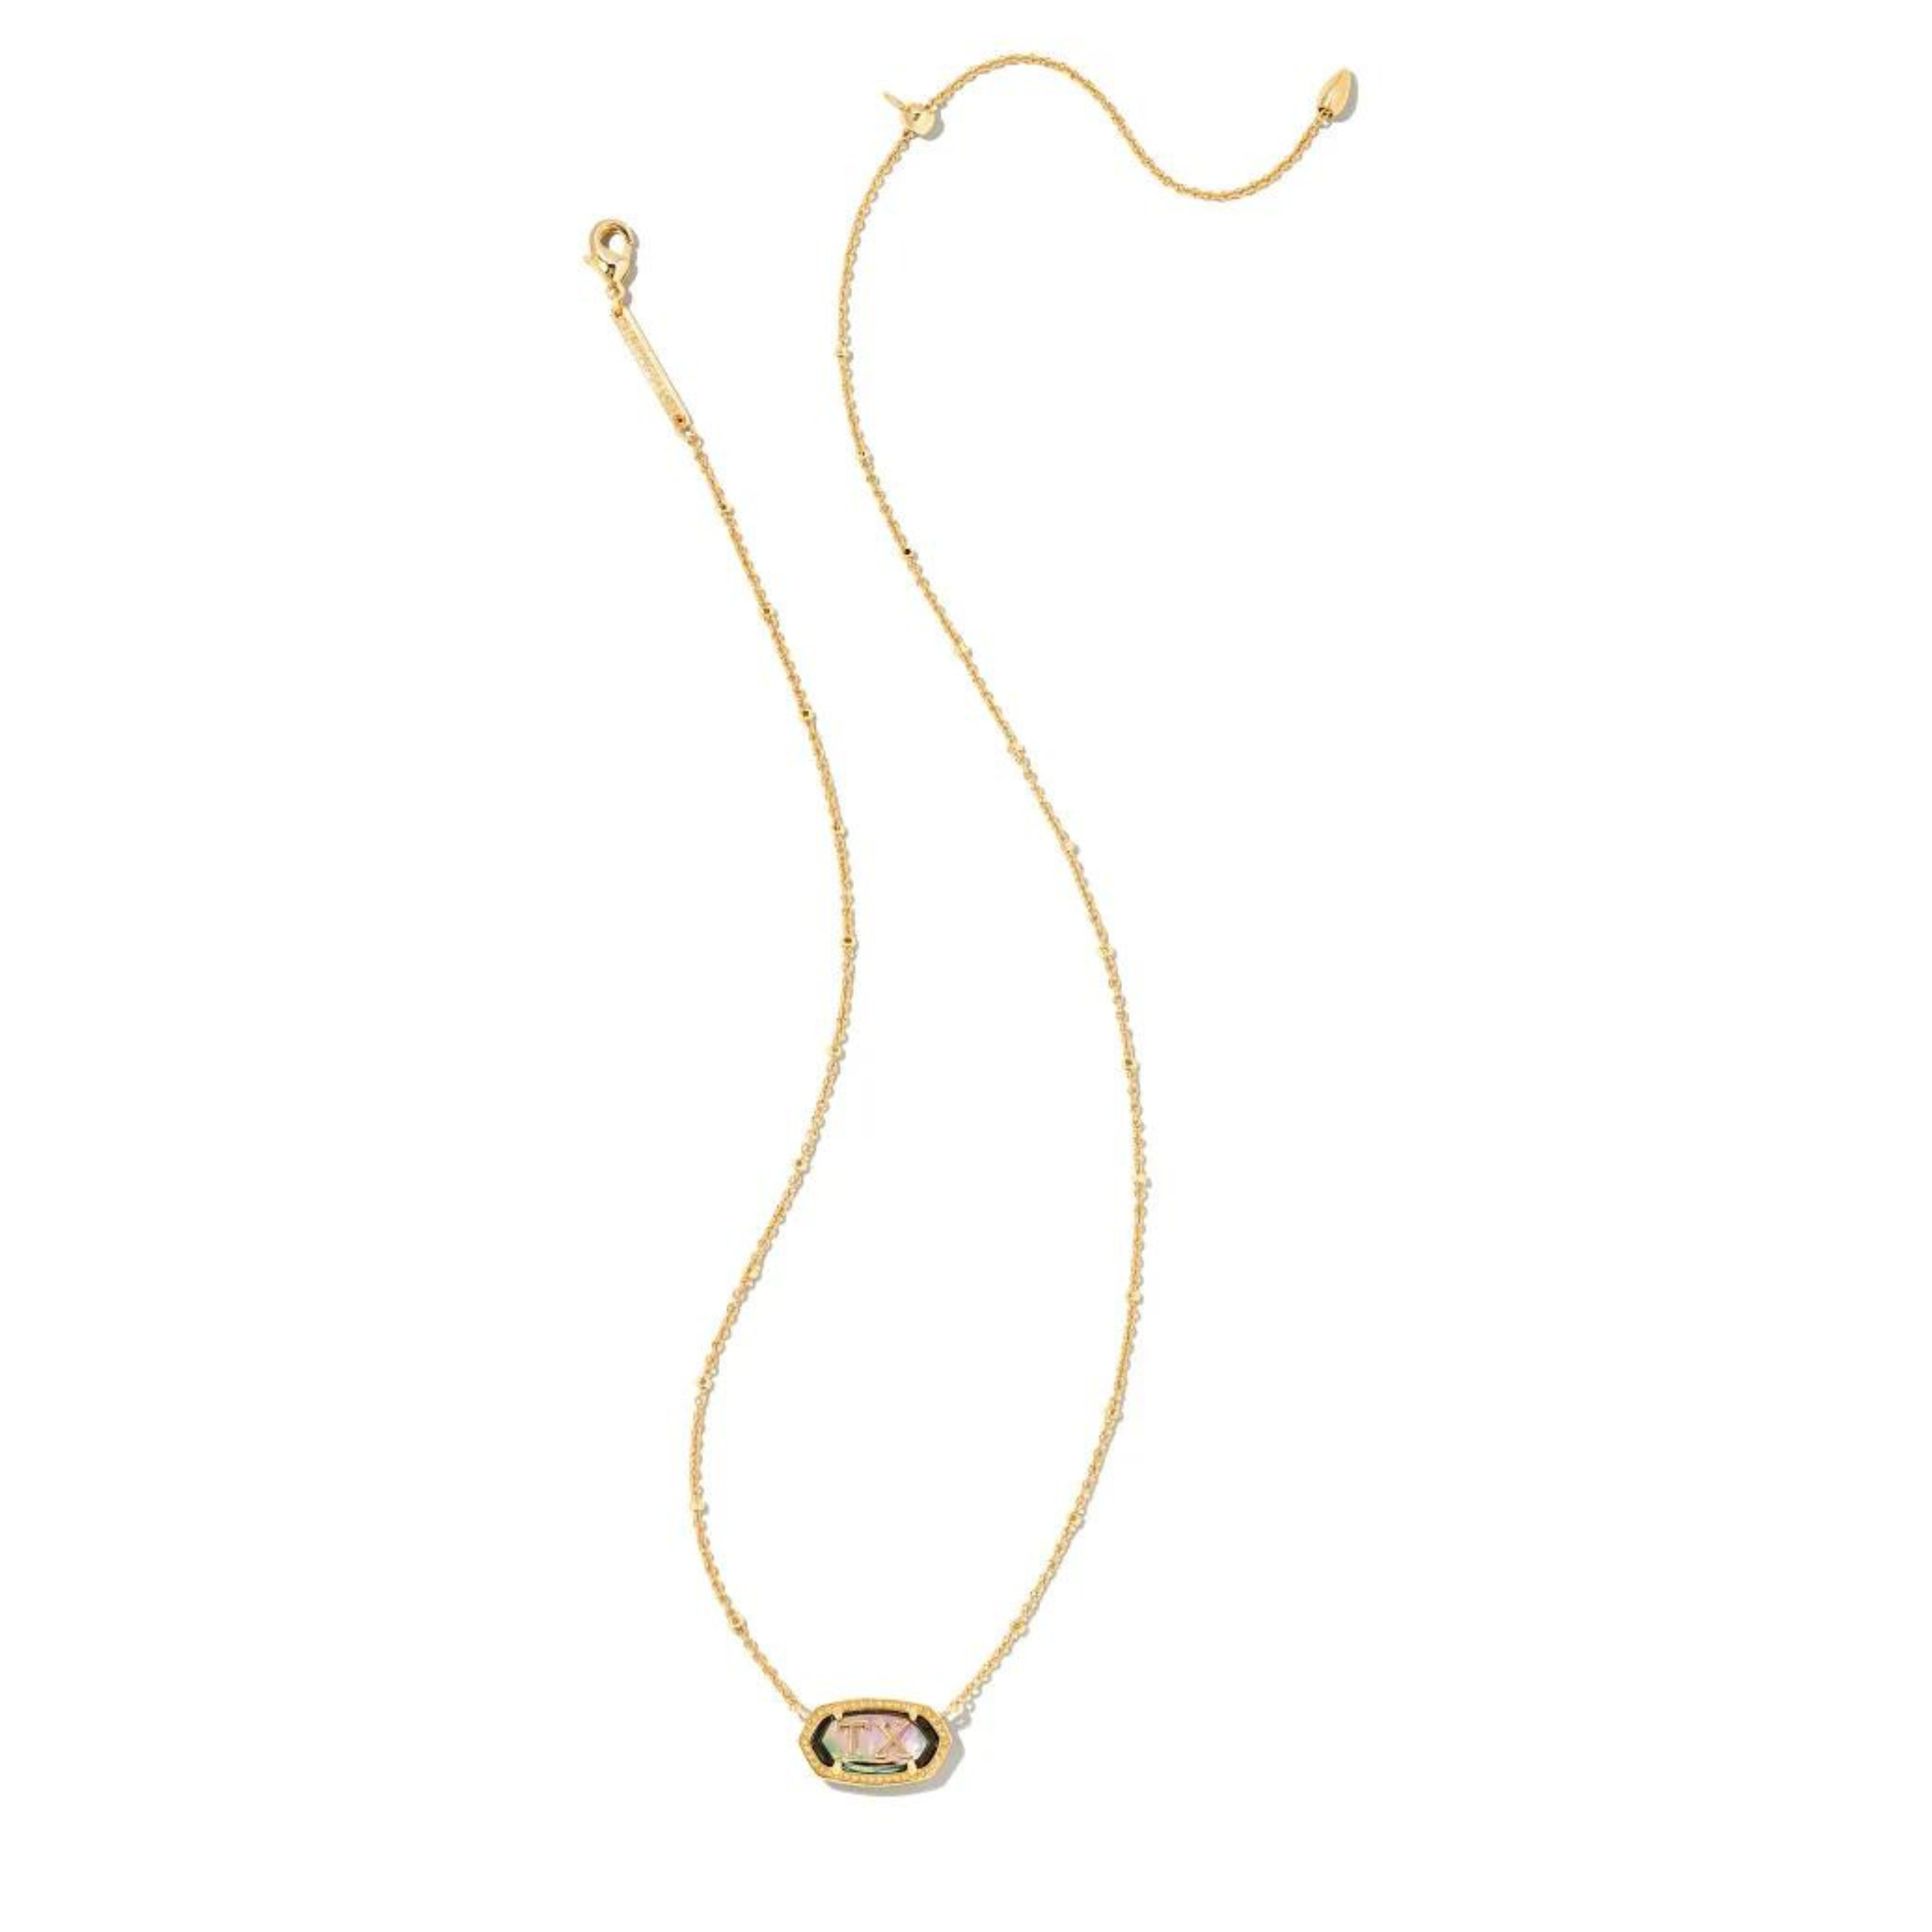 Kendra Scott-Oleana Gold Pendant Necklace In Abalone Shell 4217718870